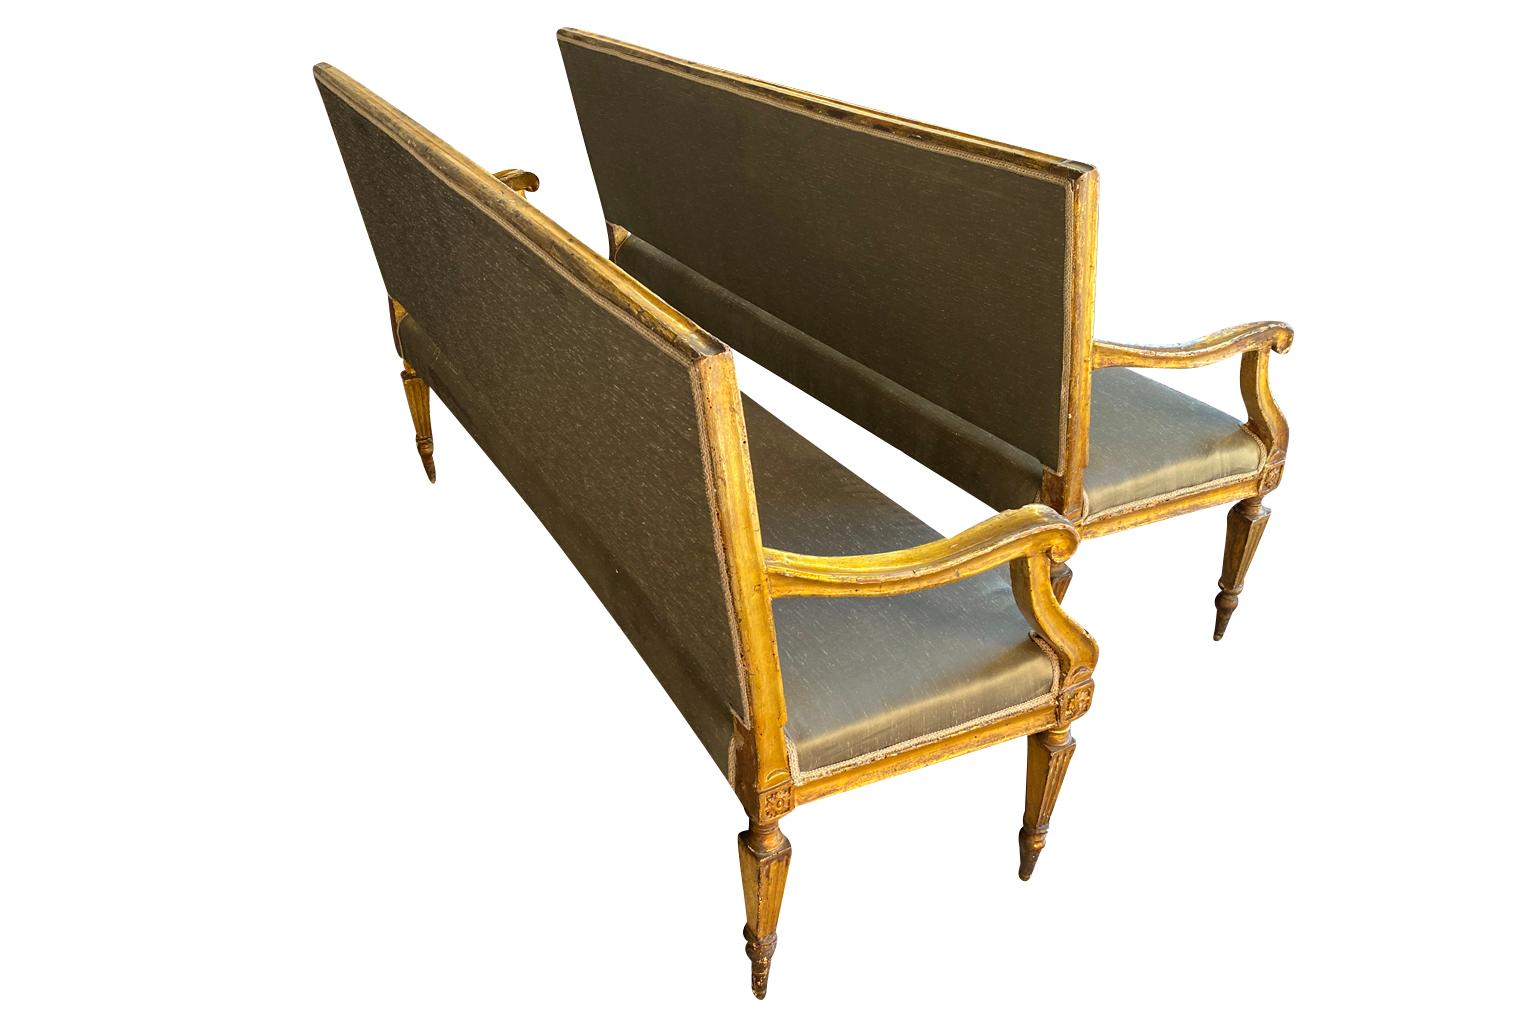 An outstanding pair of 18th century Louis XVI period Banquettes from Venice, Italy. Beautifully constructed from gilt wood. Wonderful patina. Perfect accents for an elegant surrounding.